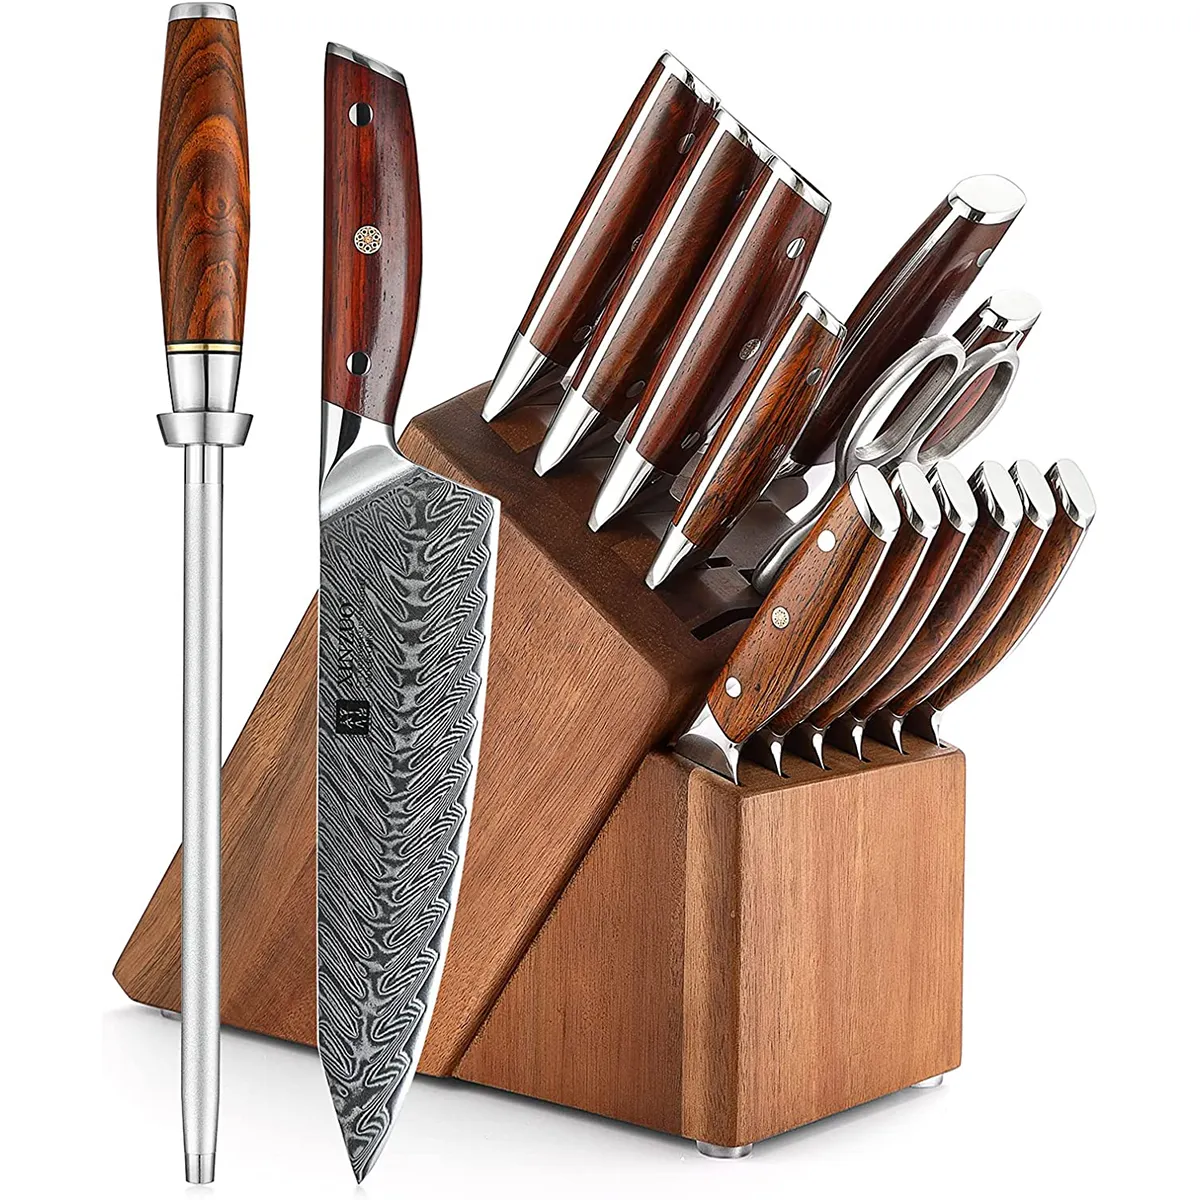 XINZUO 15 pcs High quality 10Cr Damascus steel sharp Kitchen Chef Knife Set with different knives sharpener scissors